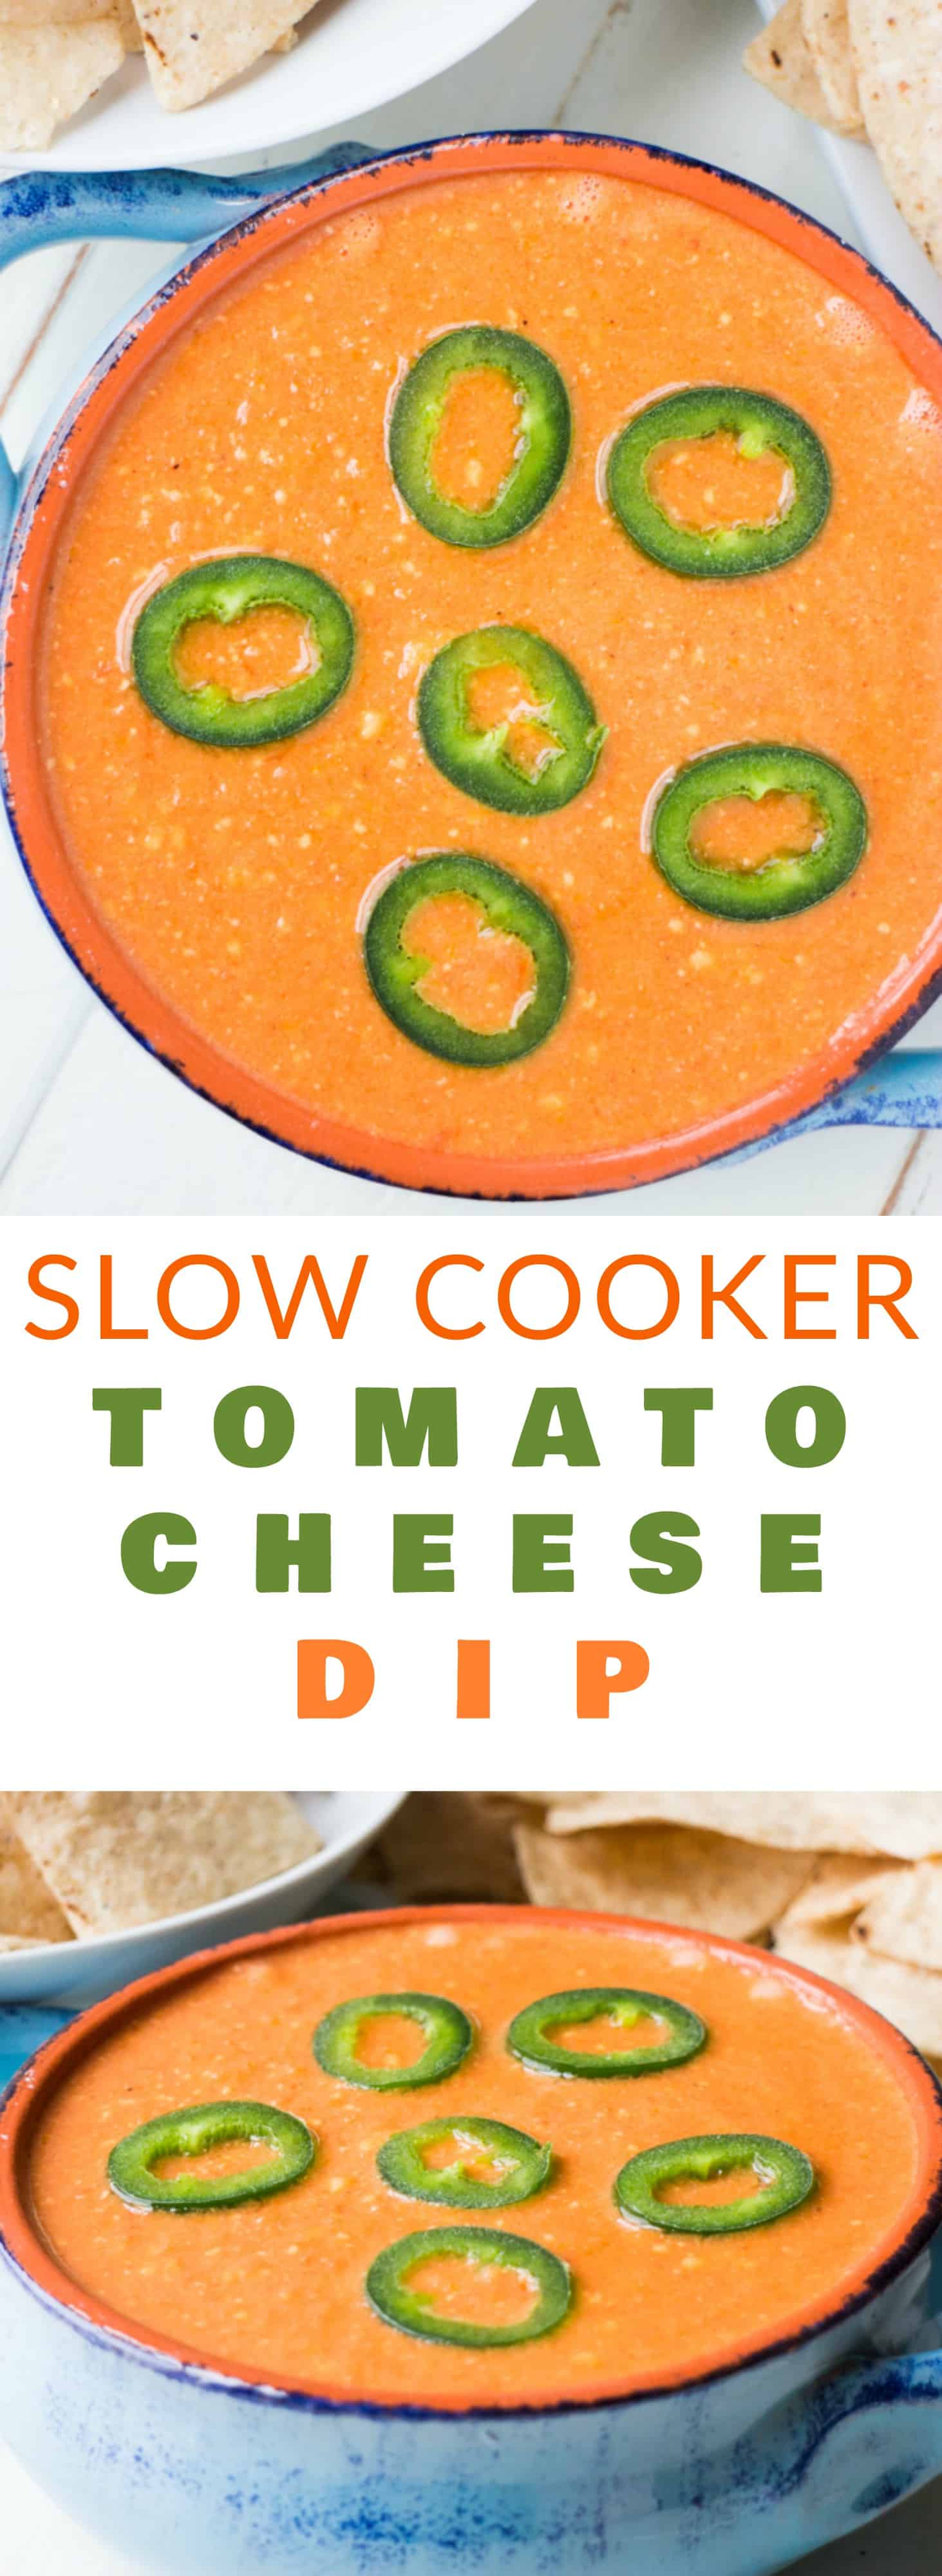 Slow Cooker Tomato Cheese Dip is a creamy easy to make dip that uses fresh tomatoes, peppers and Velveeta cheese! This simple homemade recipe is ready in 2 hours in the slow cooker and perfect to serve with tortilla chips for your next party! We especially love this dip for Mexican meals!